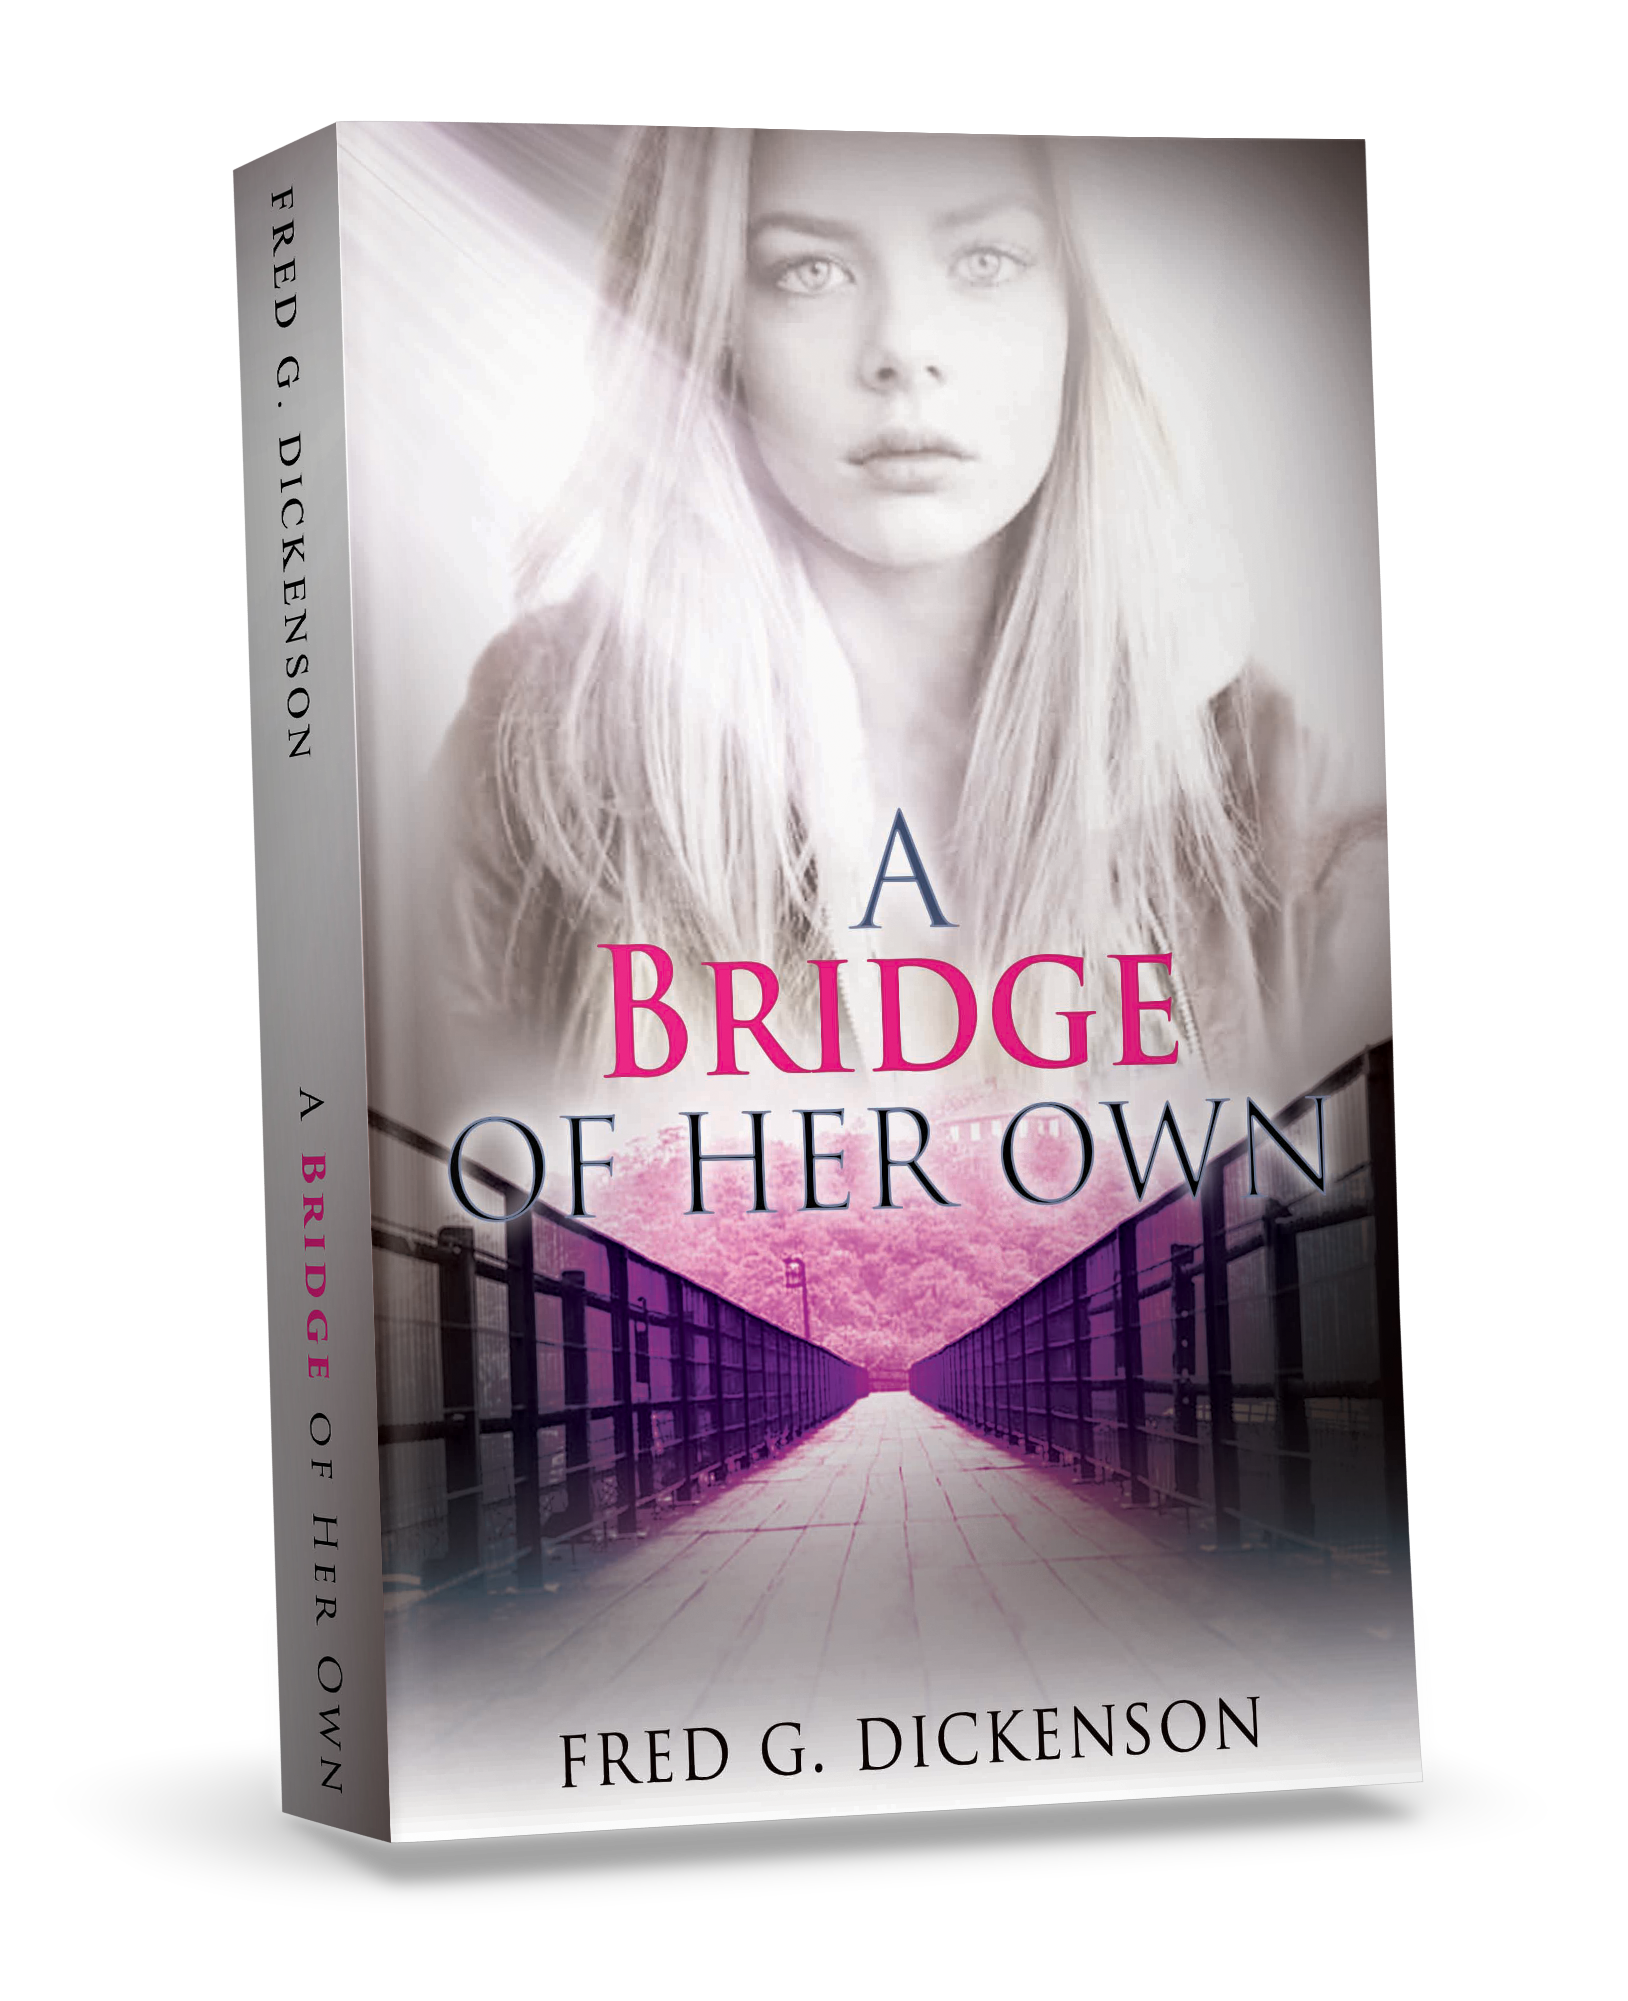 A Bridge of Her Own by Fred G. Dickenson. 